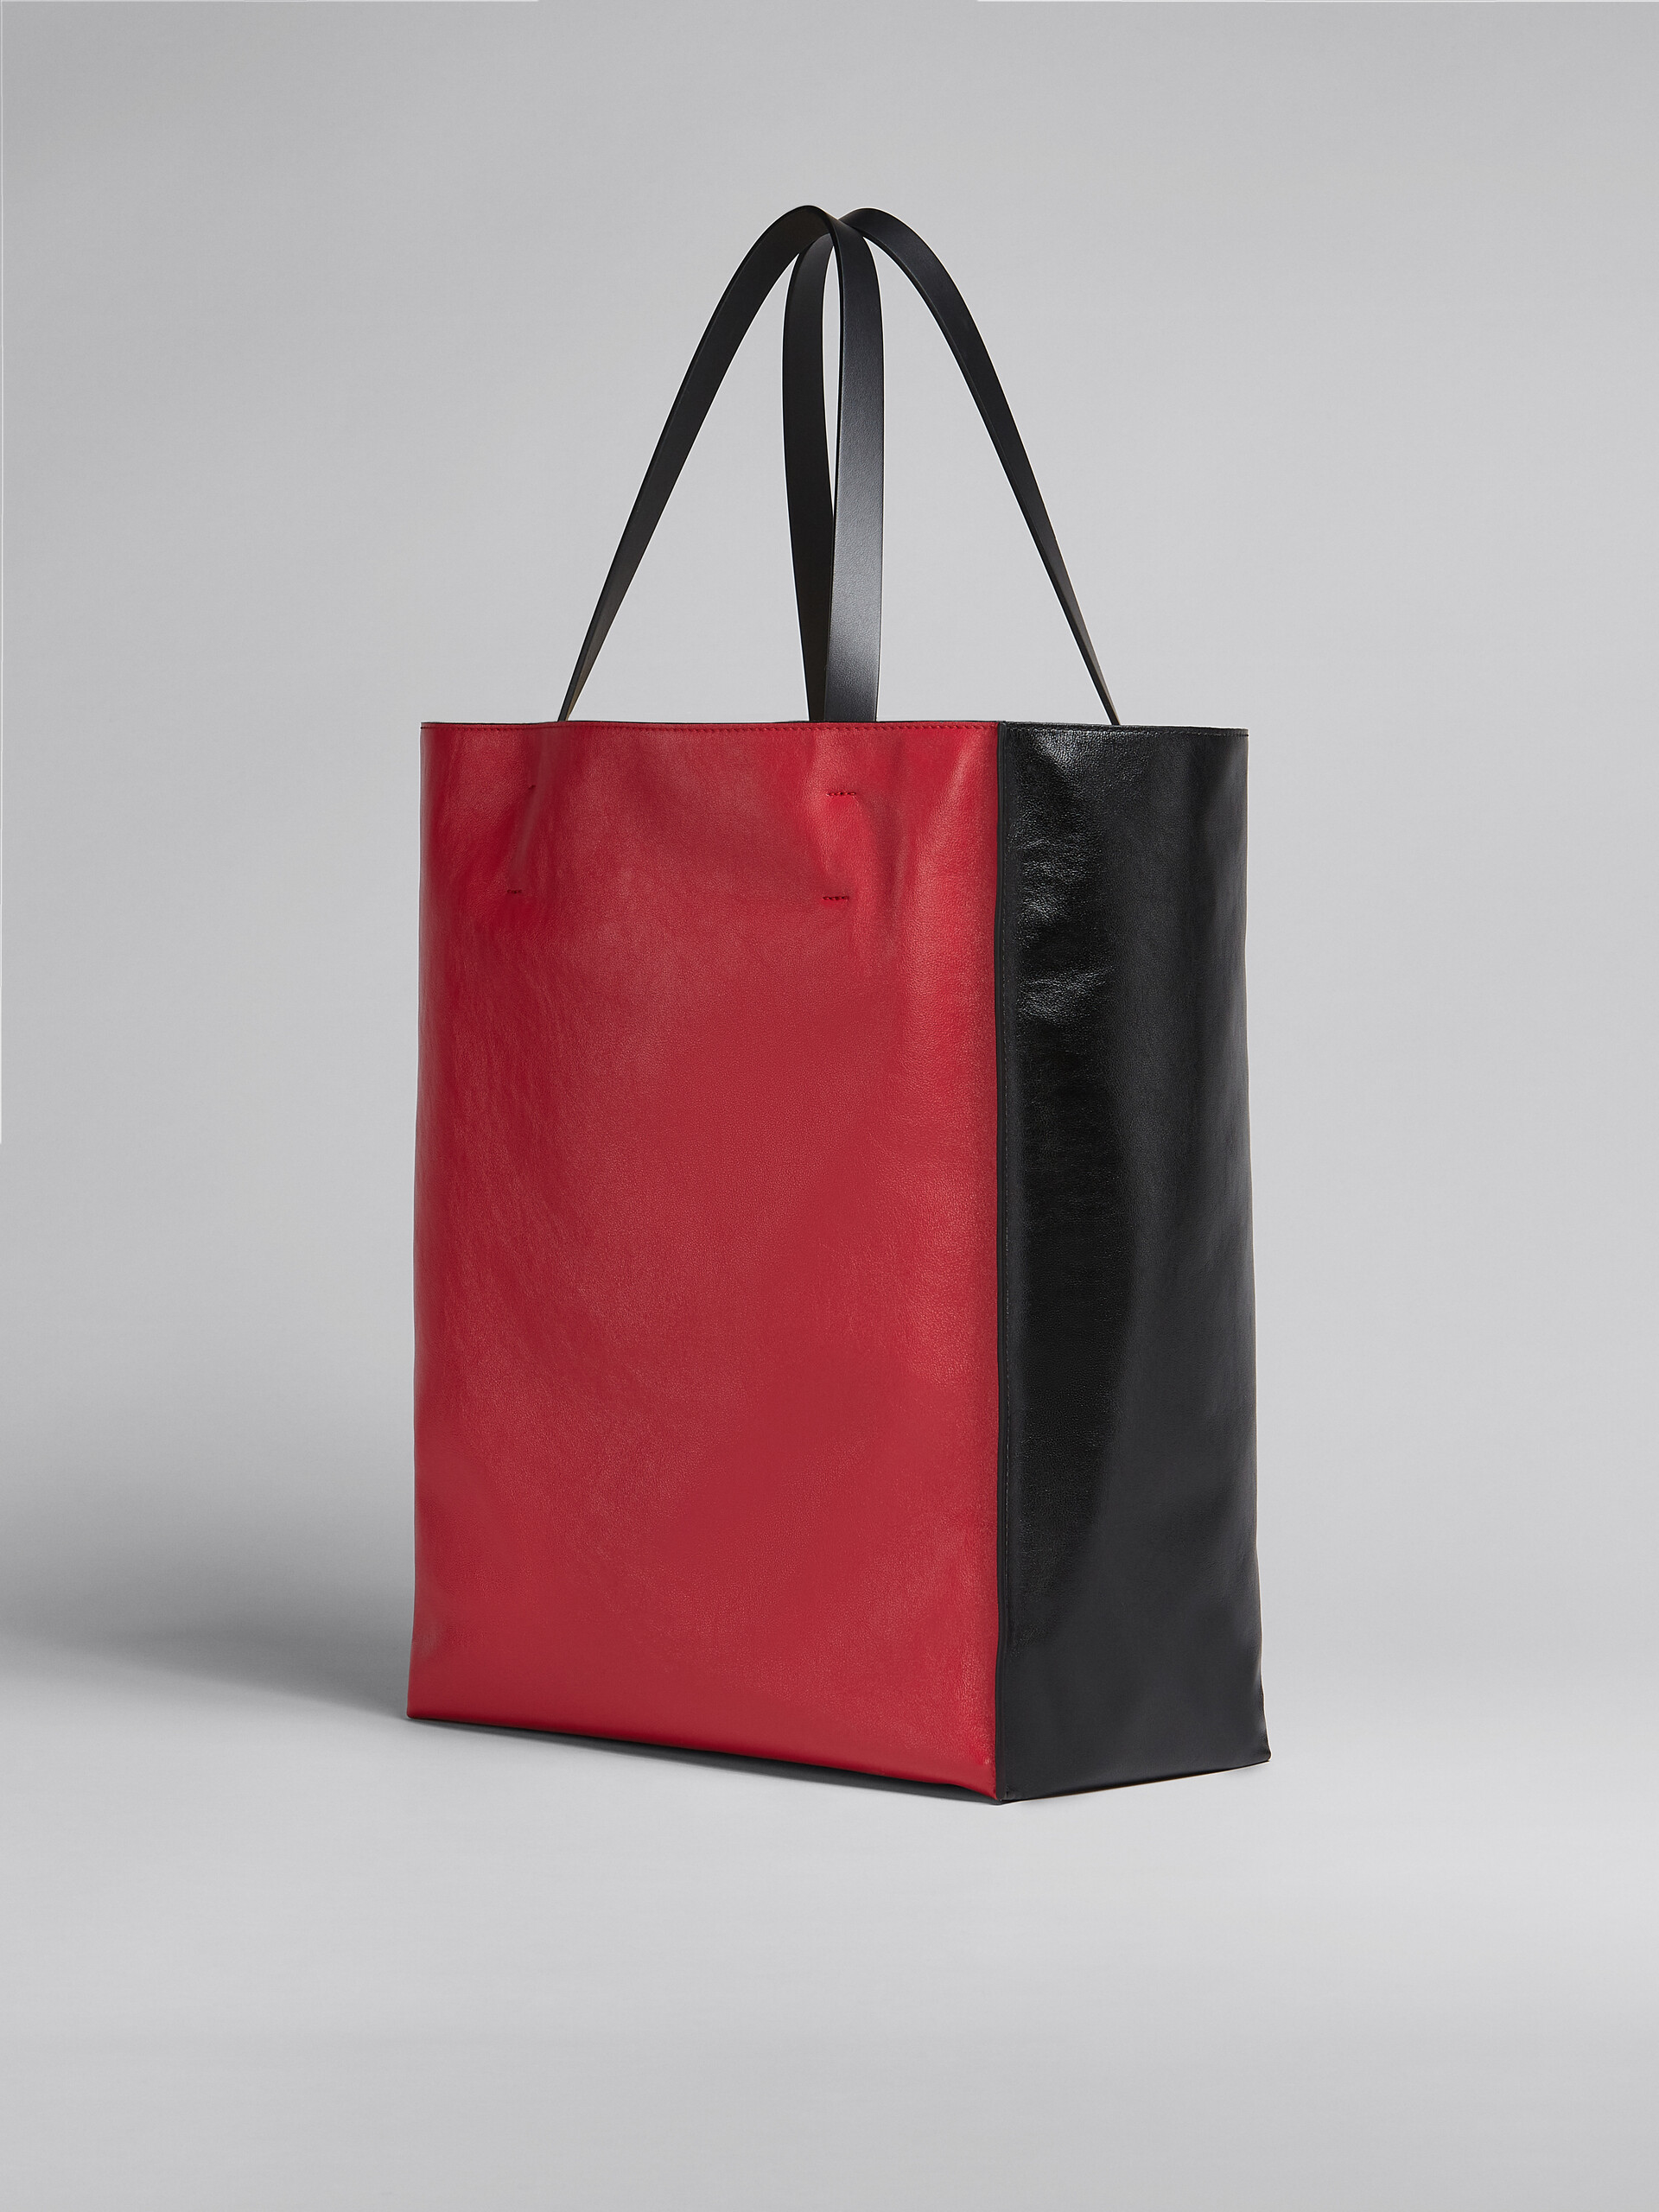 Museo Soft Large bag in black and red shiny leather - Shopping Bags - Image 3